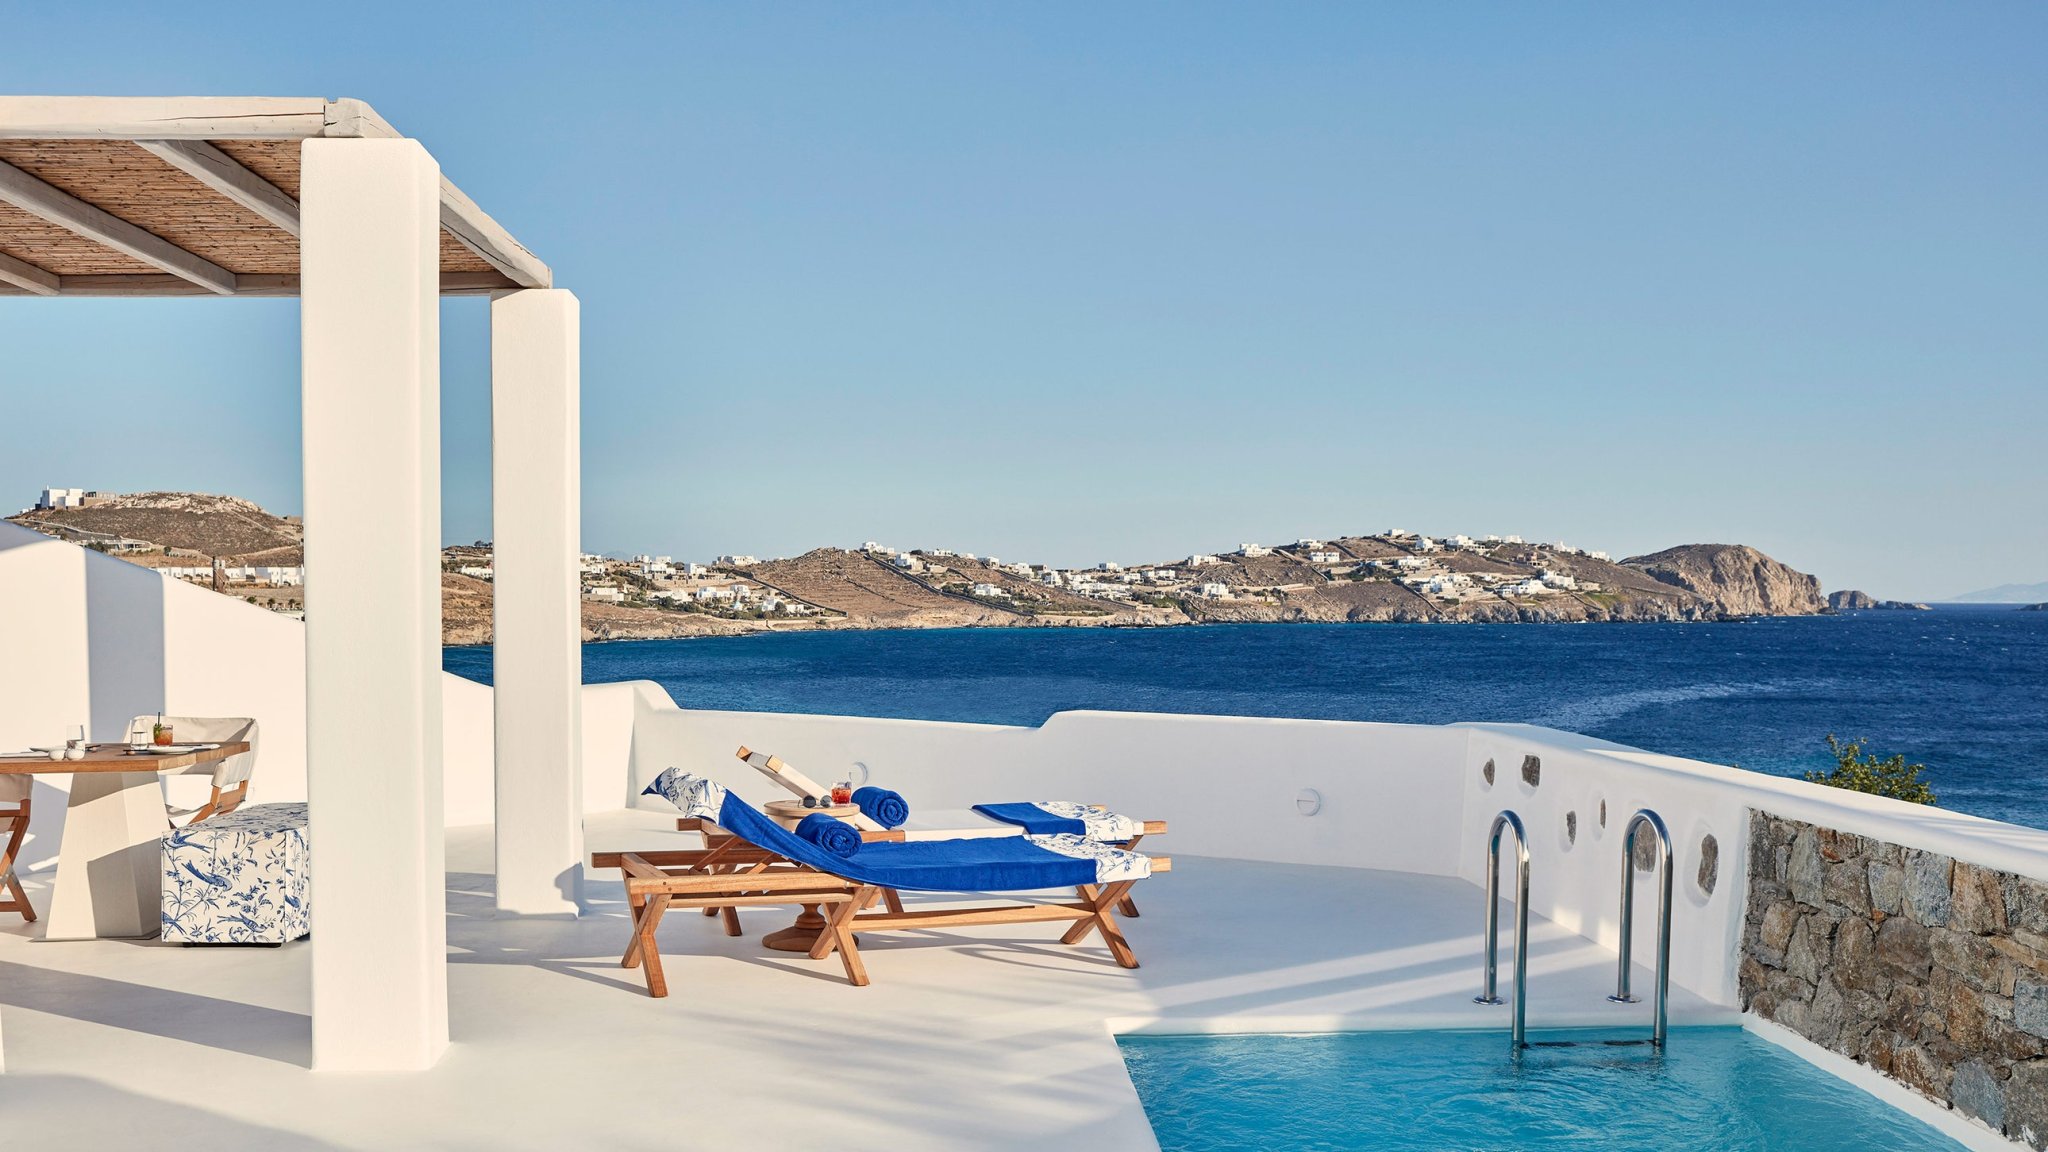 Readers' Choice Awards 2021: the best hotels in Turkey and Greece